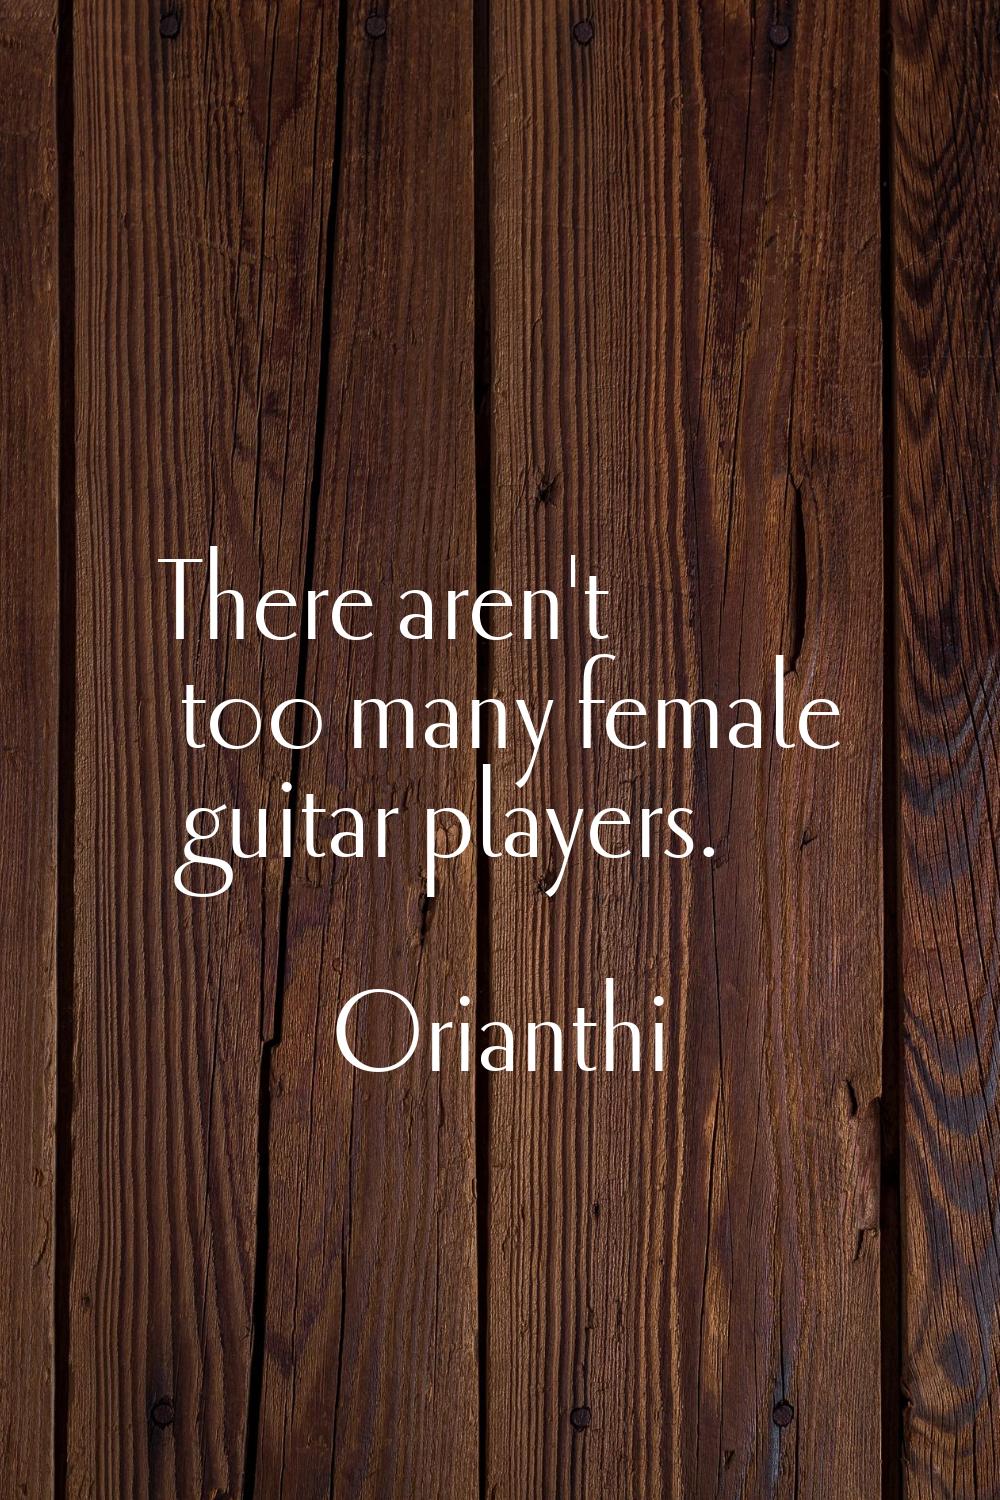 There aren't too many female guitar players.